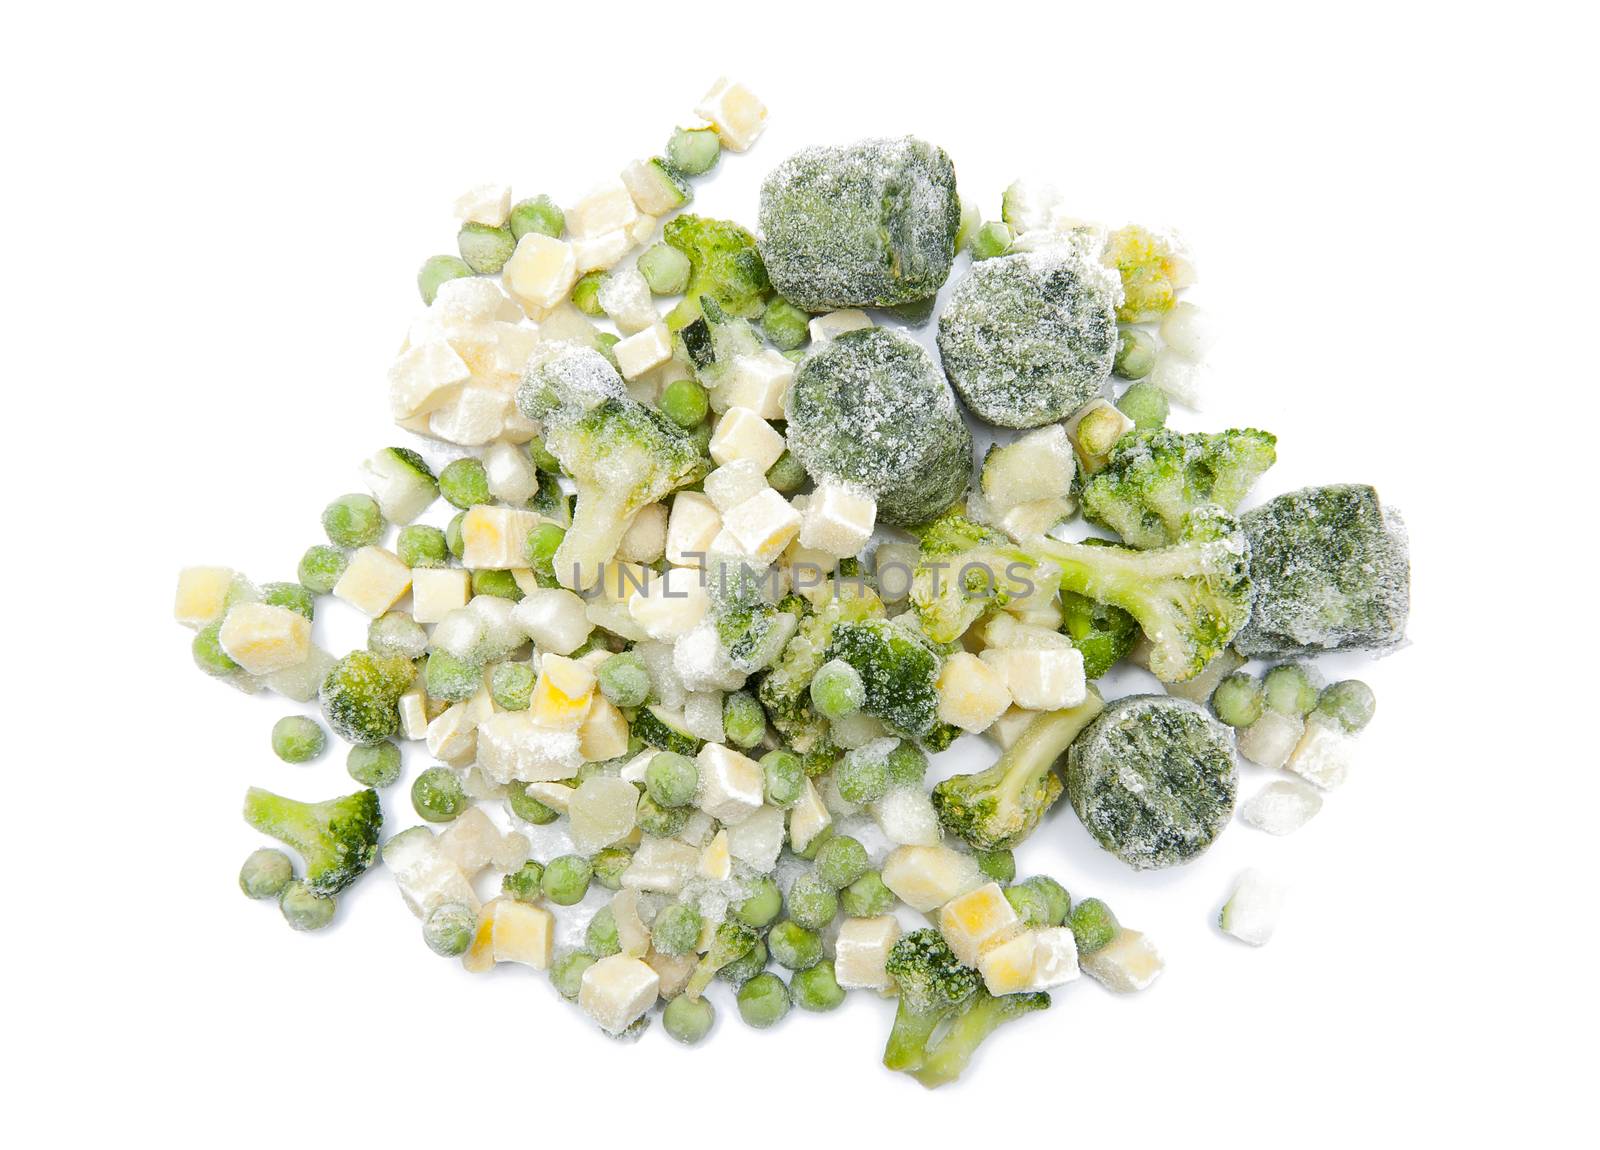 Frozen vegetables isolated on the white background by Yaurinko